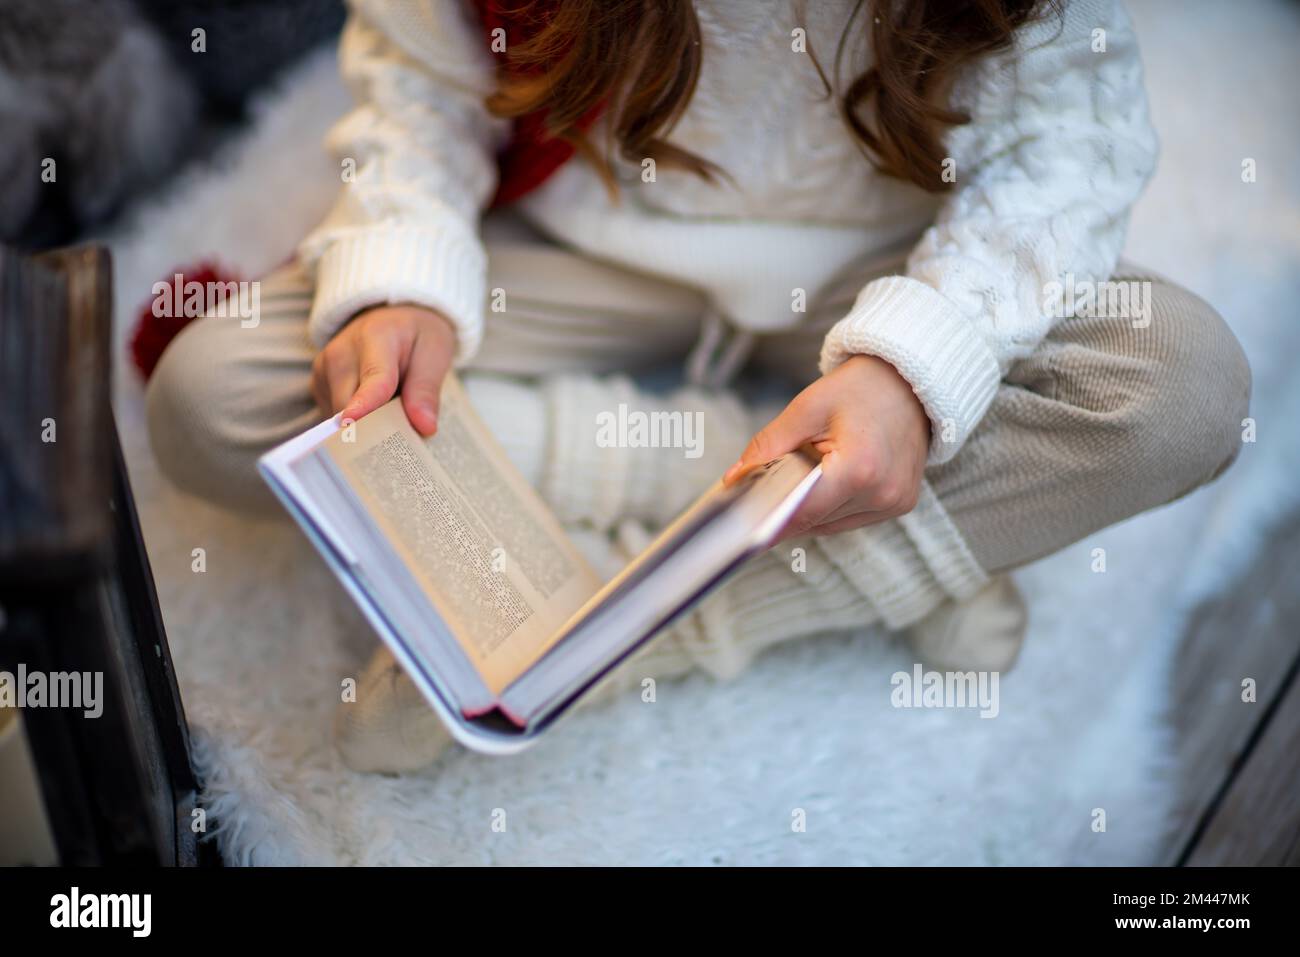 A girl with a book is sitting on the floor on a furry white carpet. Dressed in a white sweater and light trousers with a red scarf. Stock Photo